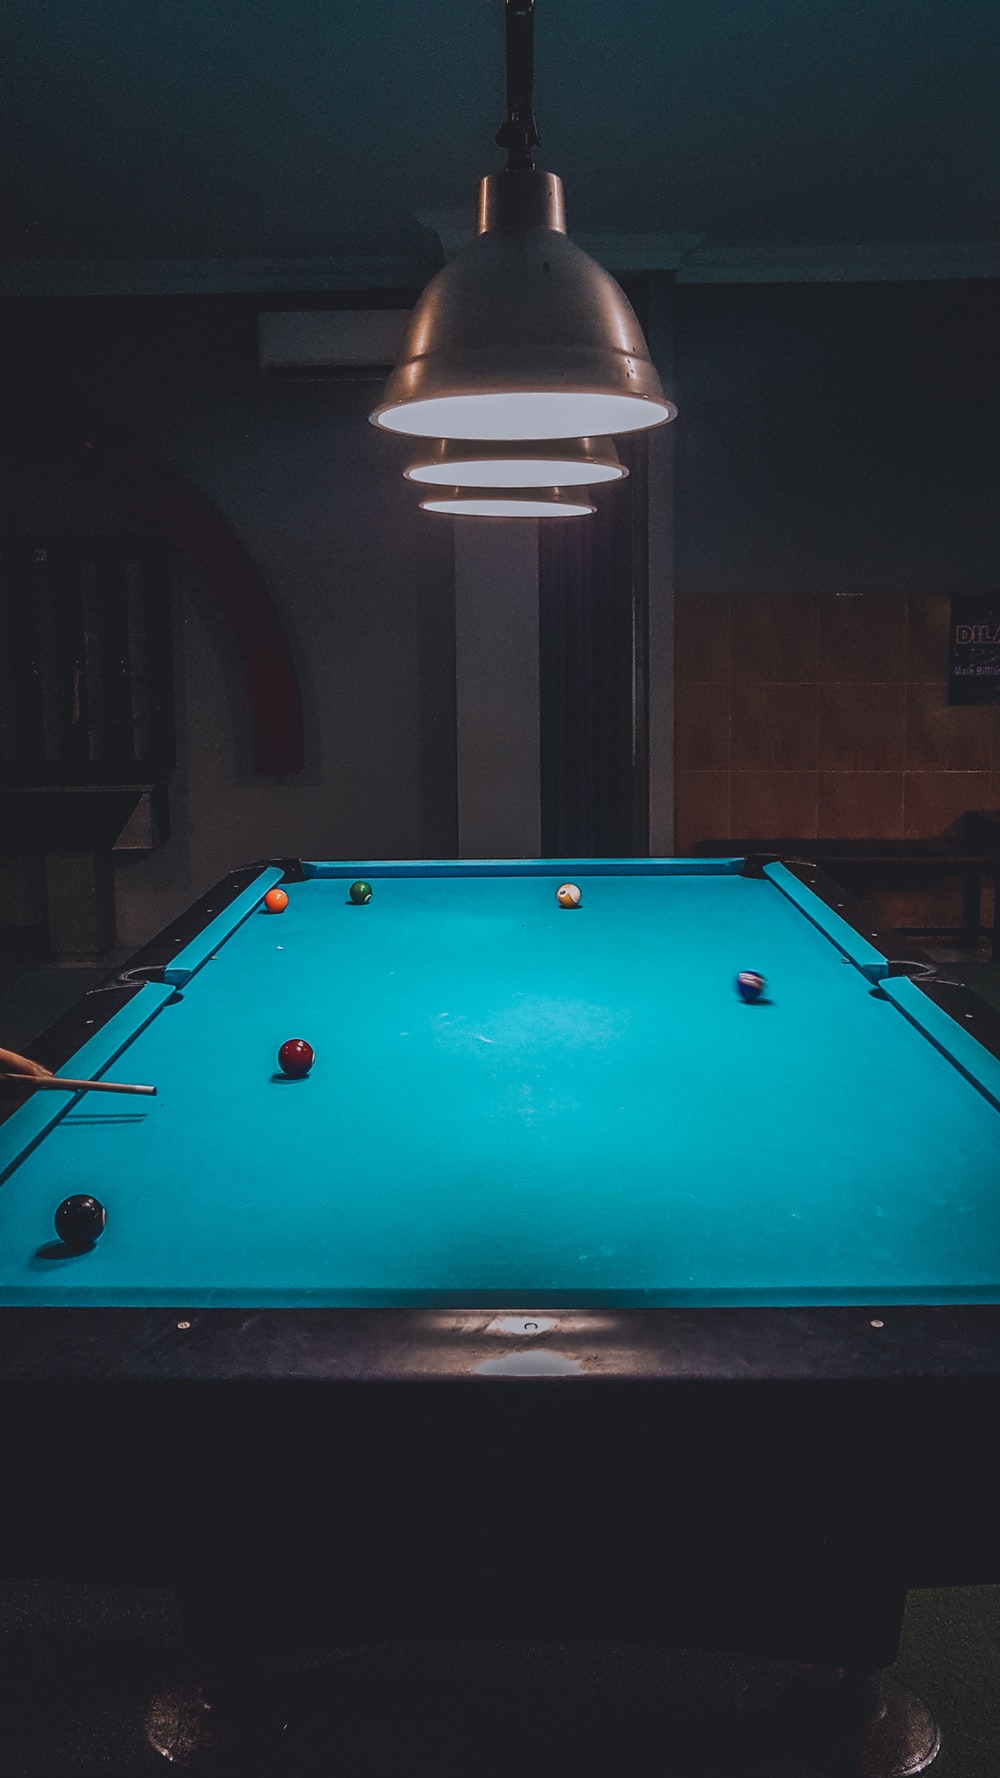 Pool Table Pictures Image